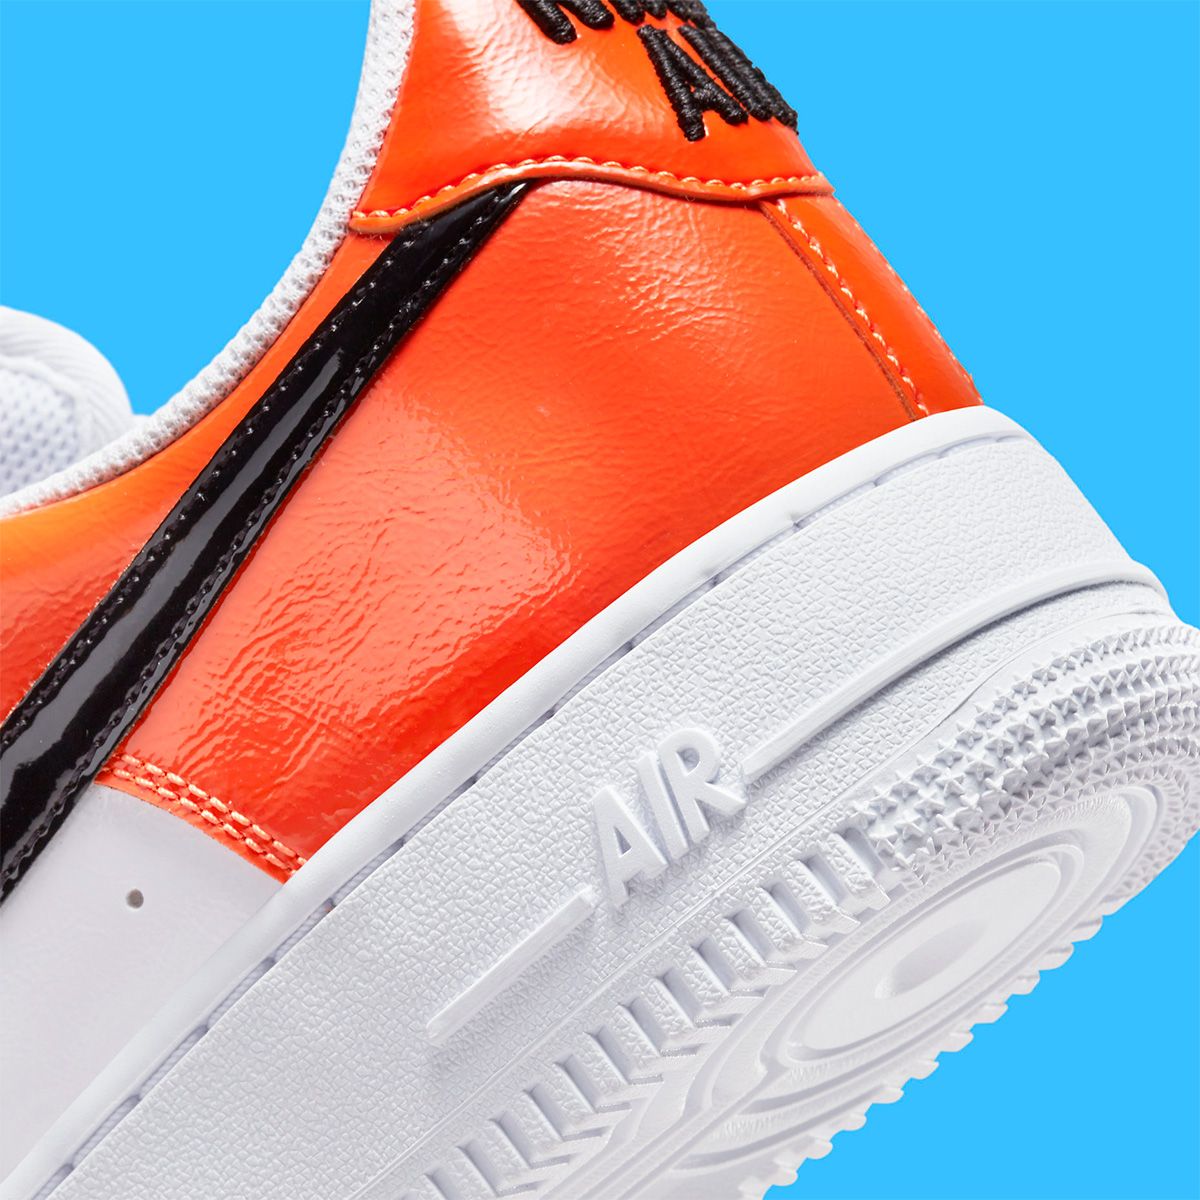 Nike Adds Black and Orange to this Patent Leather Air Force 1 Low ...